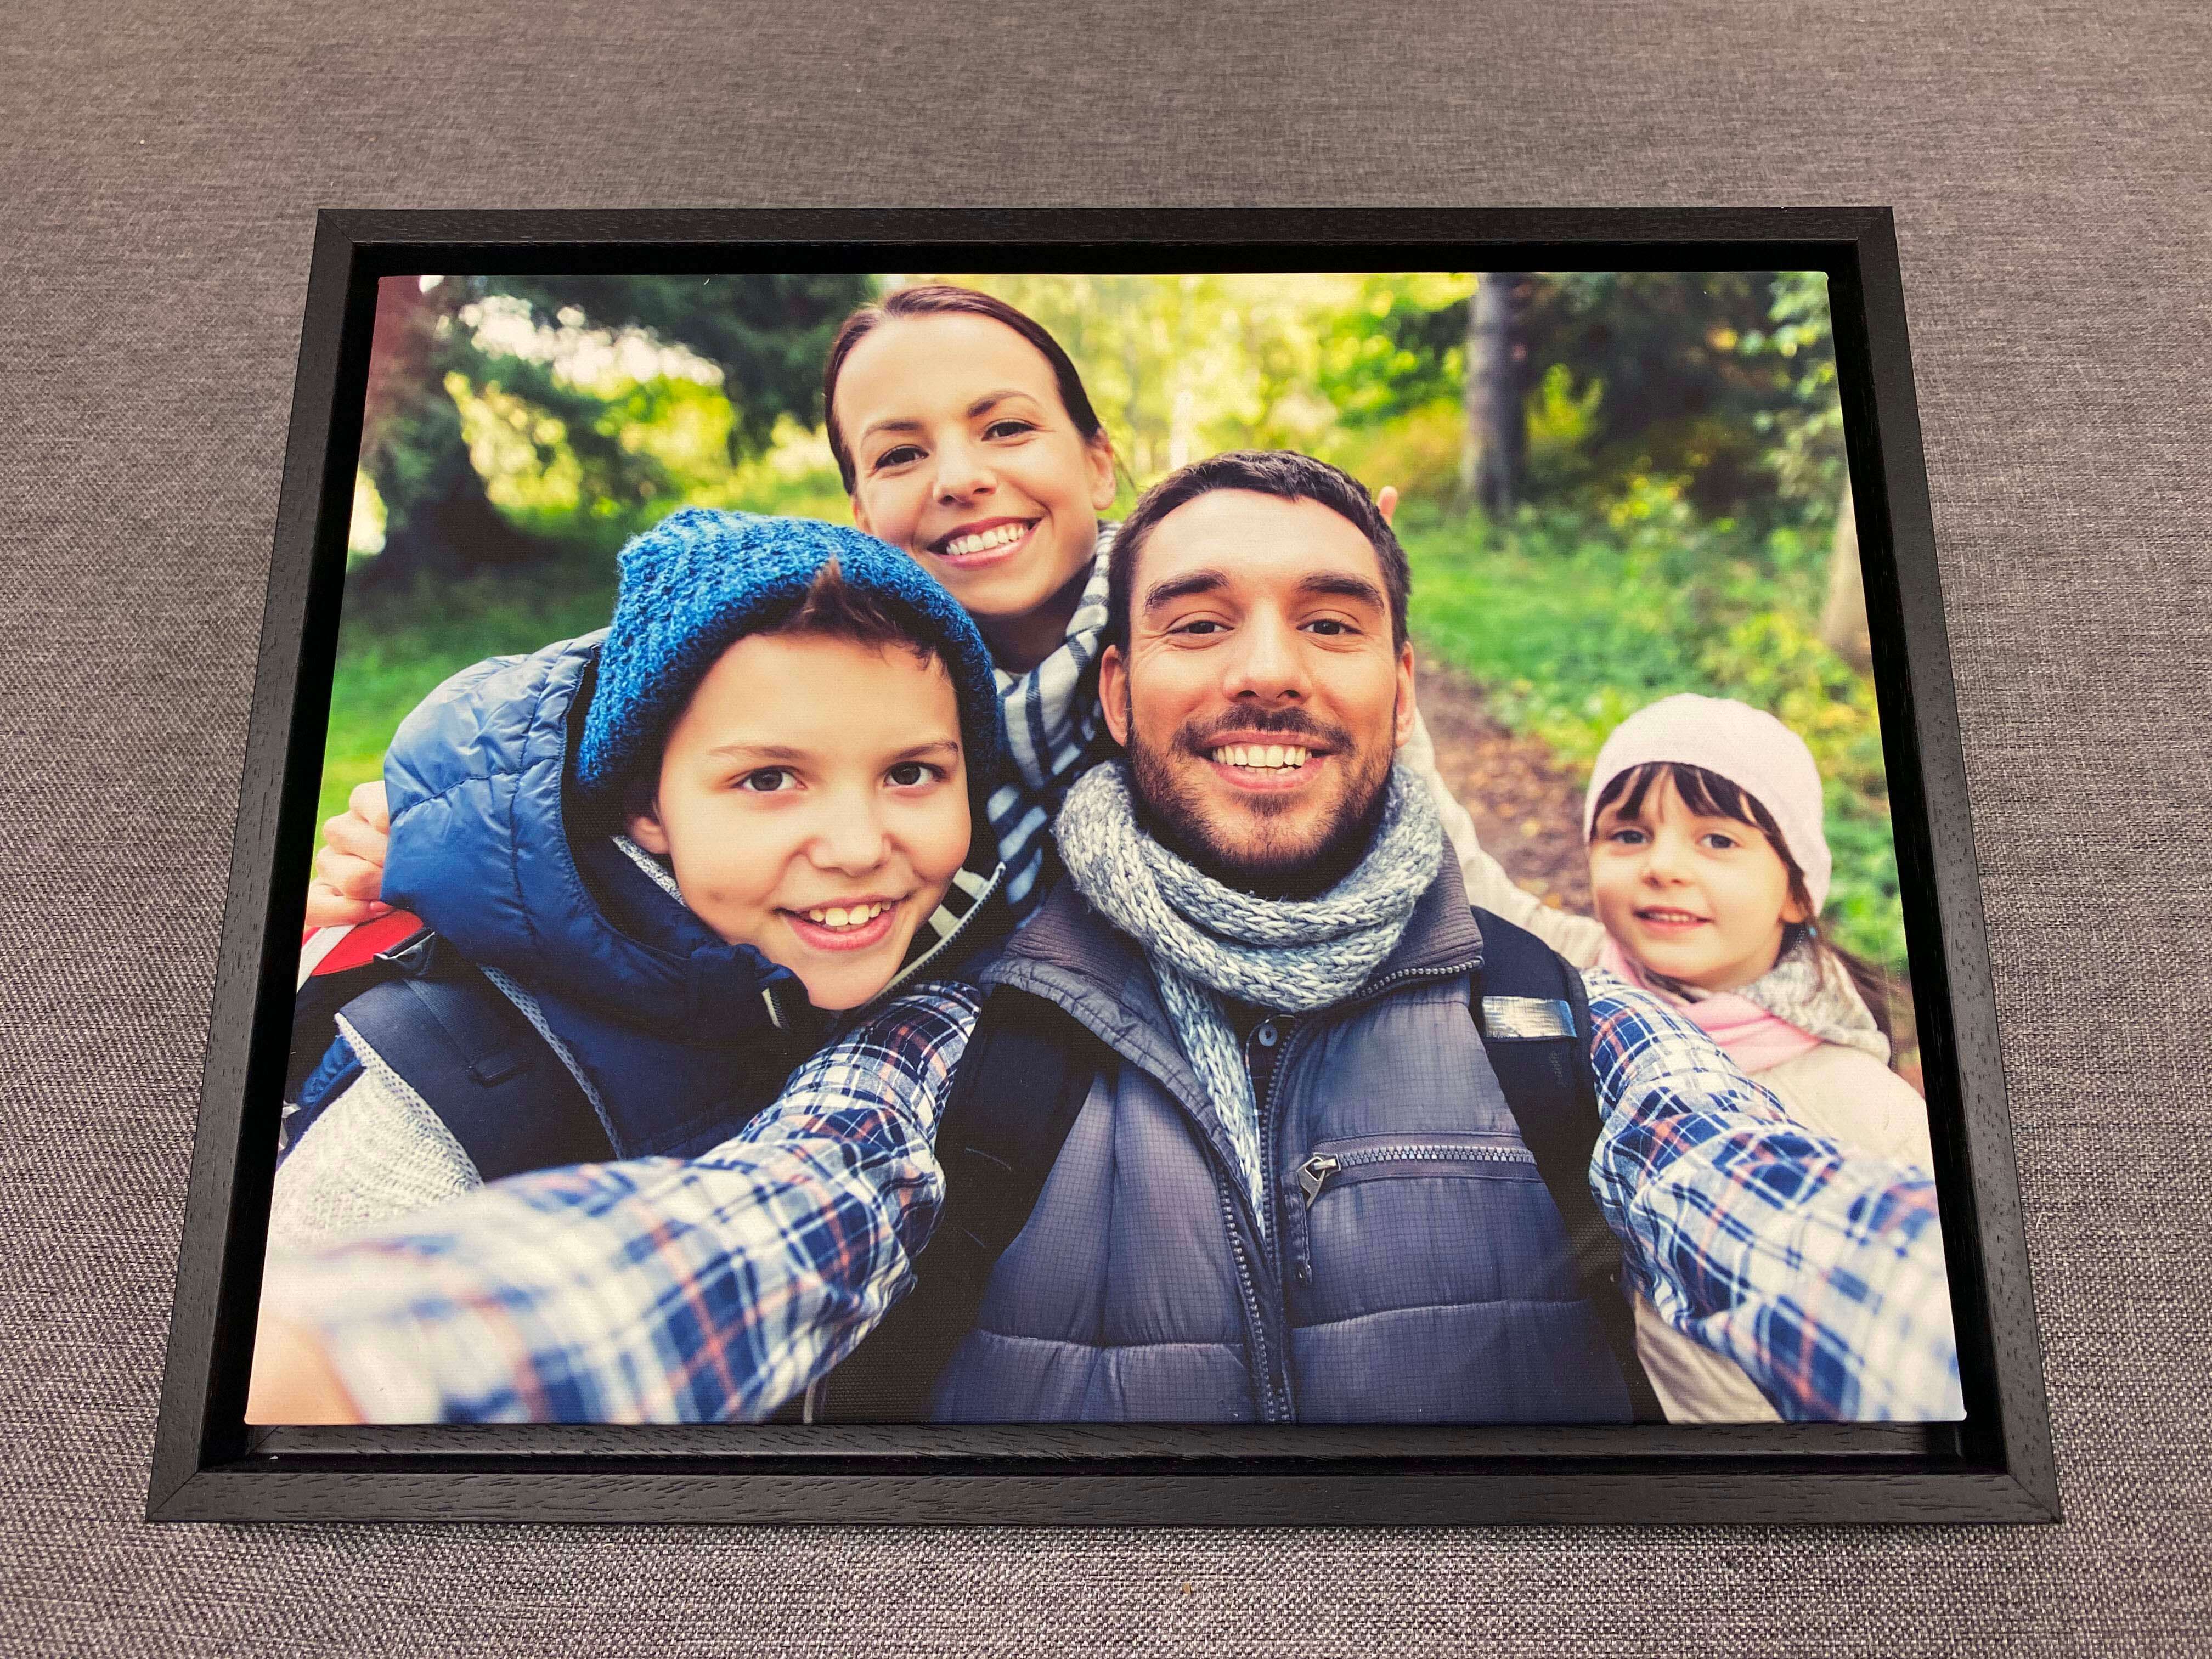 A family selfie taken on a walk in nature transformed into a quality affordable custom canvas print with a classic made to order black frame